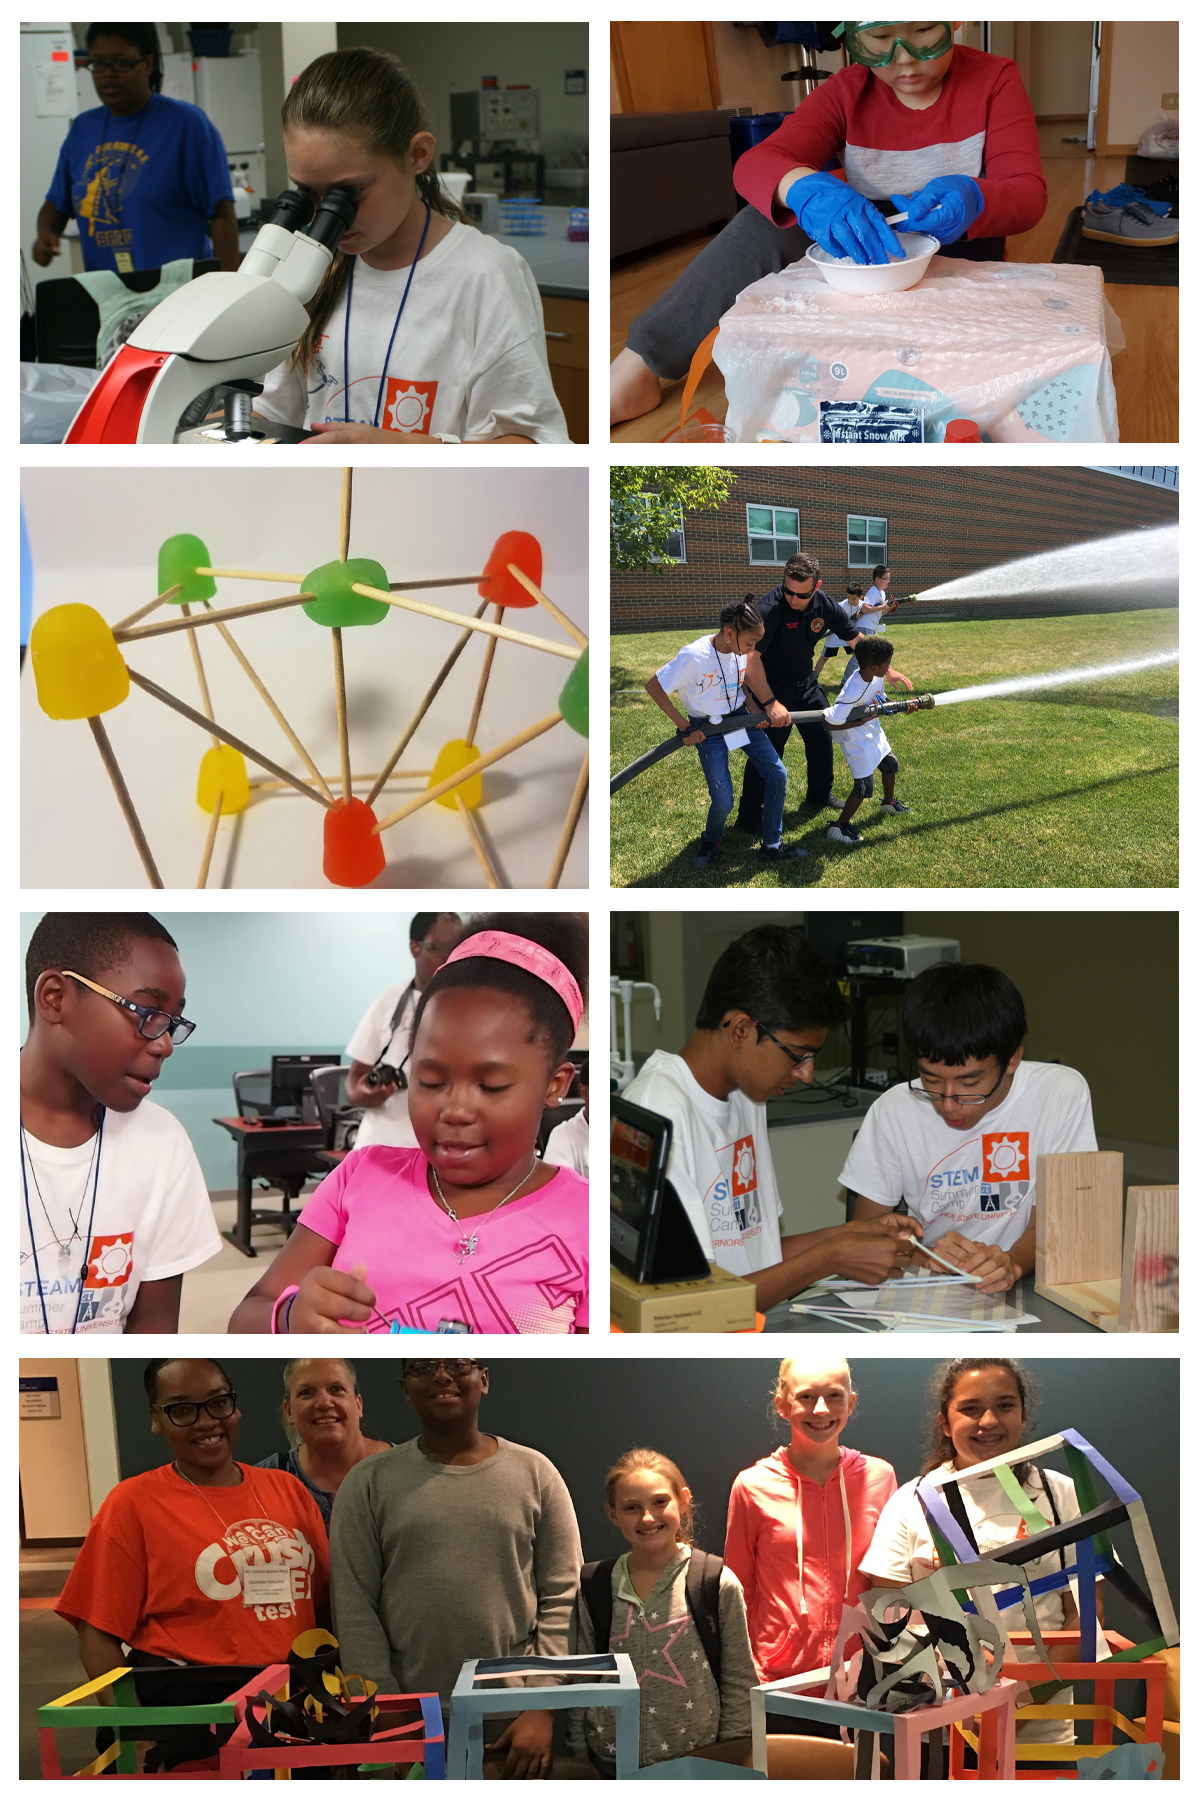 Steam Camp Collage Image 